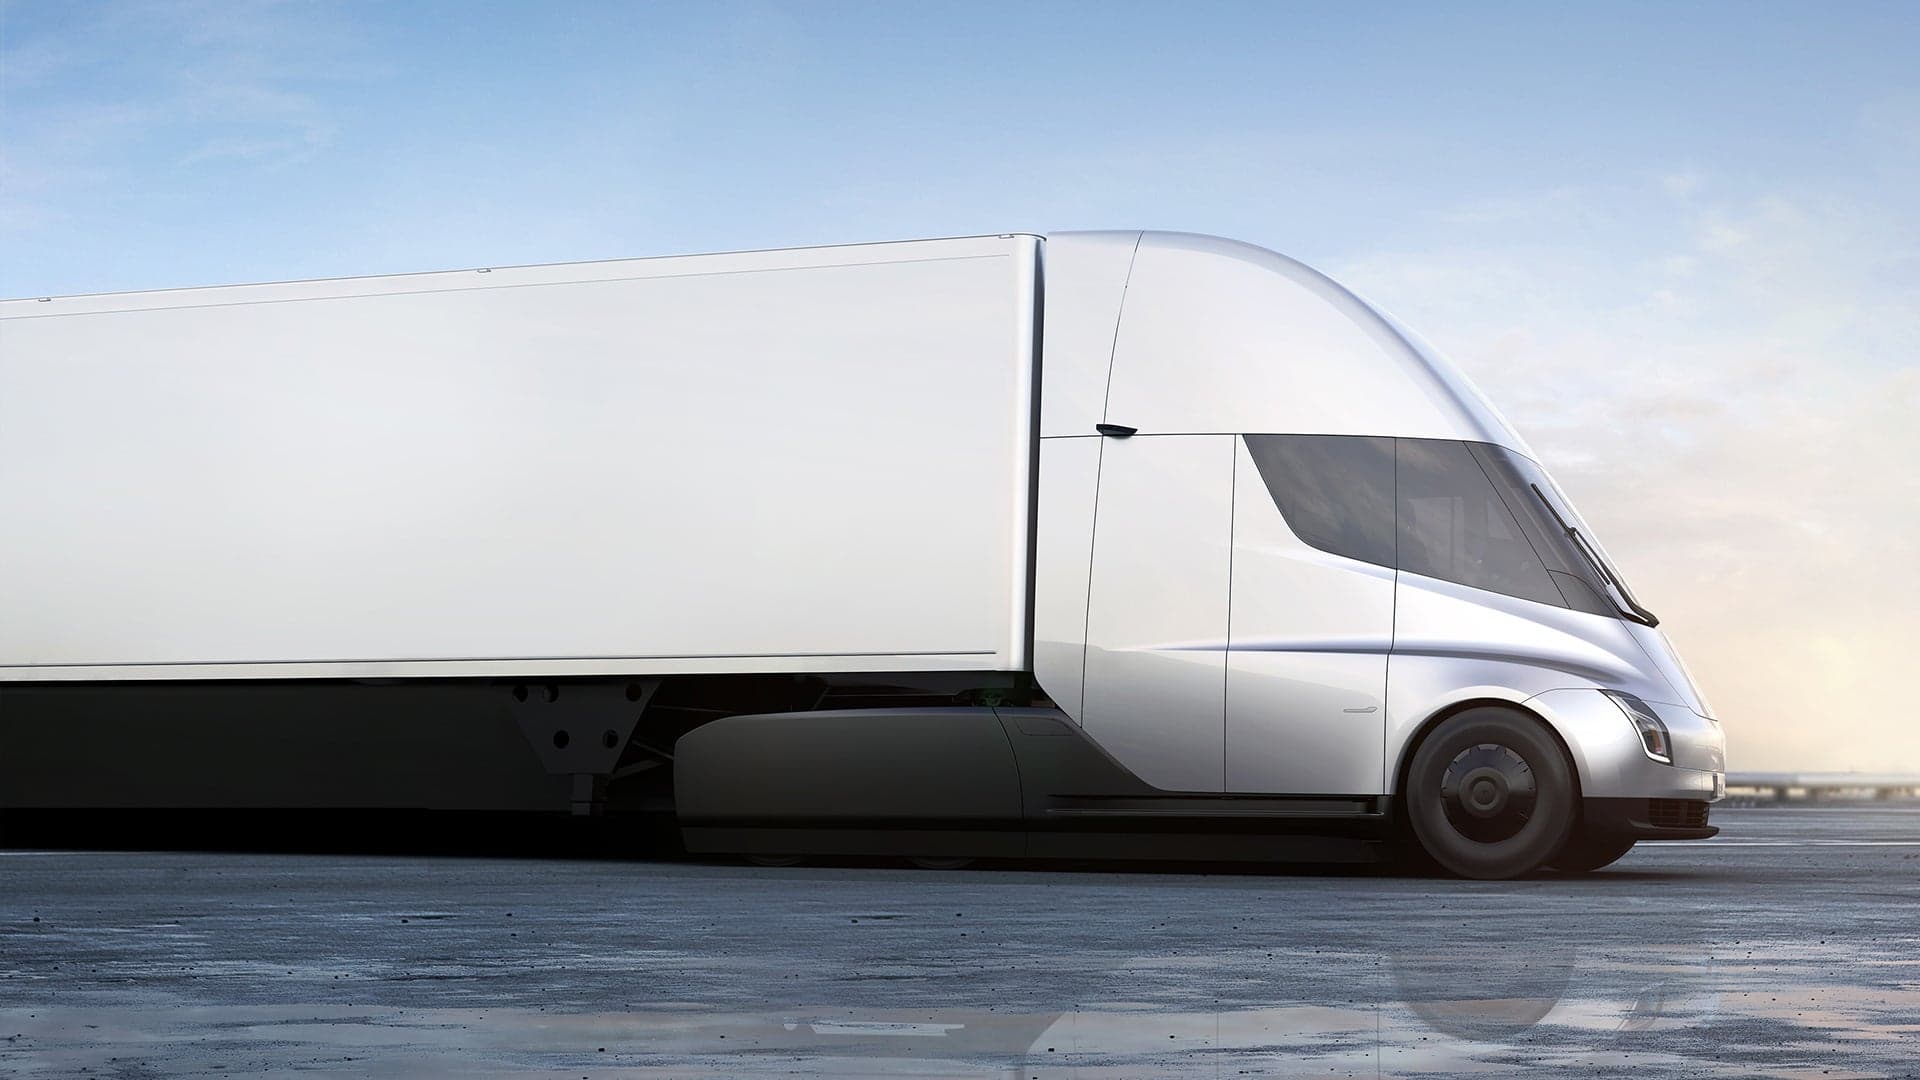 Walmart Buys 30 More Tesla Semis, Aims to Electrify Entire Fleet by 2028